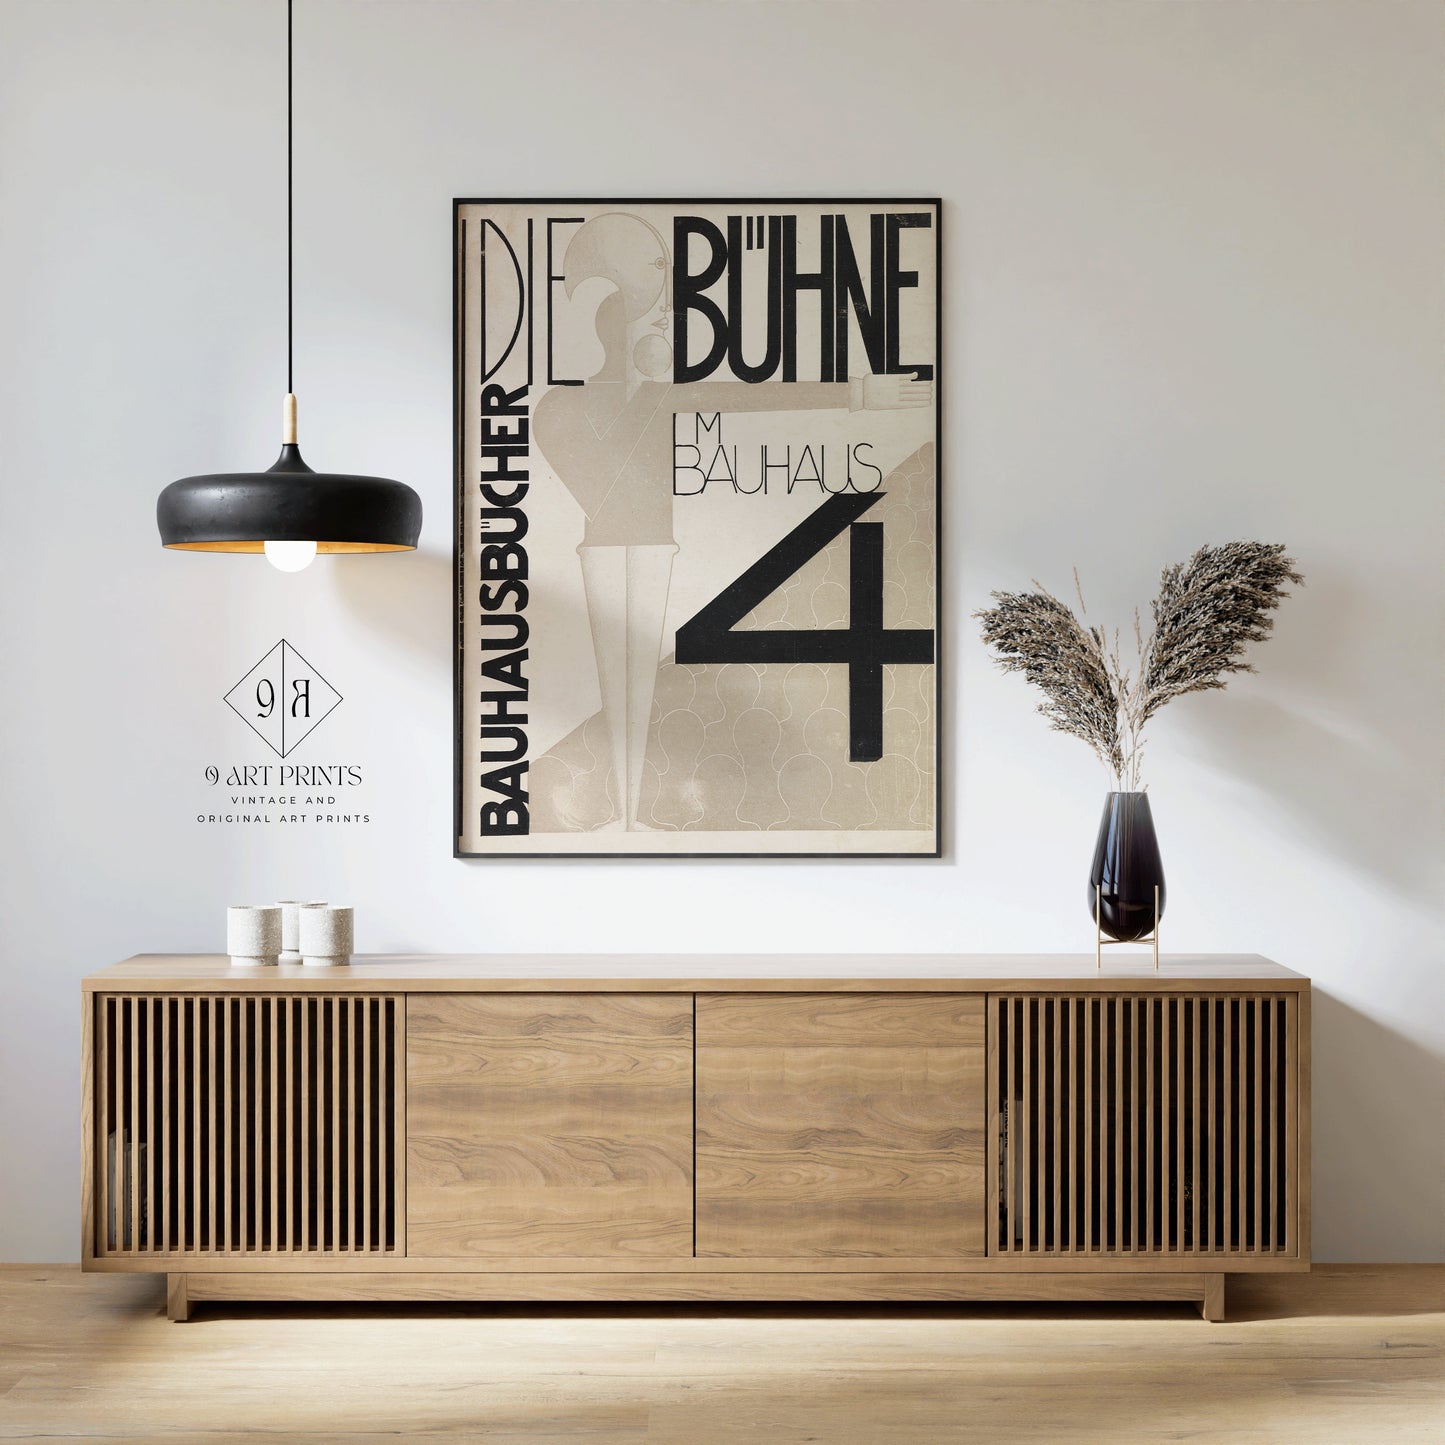 Framed Bauhaus Vintage Die Buhne Poster Mid-Century Modern Art Print 60s Vintage Museum Minimalist Abstract Ready to hang Framed Decor Gift